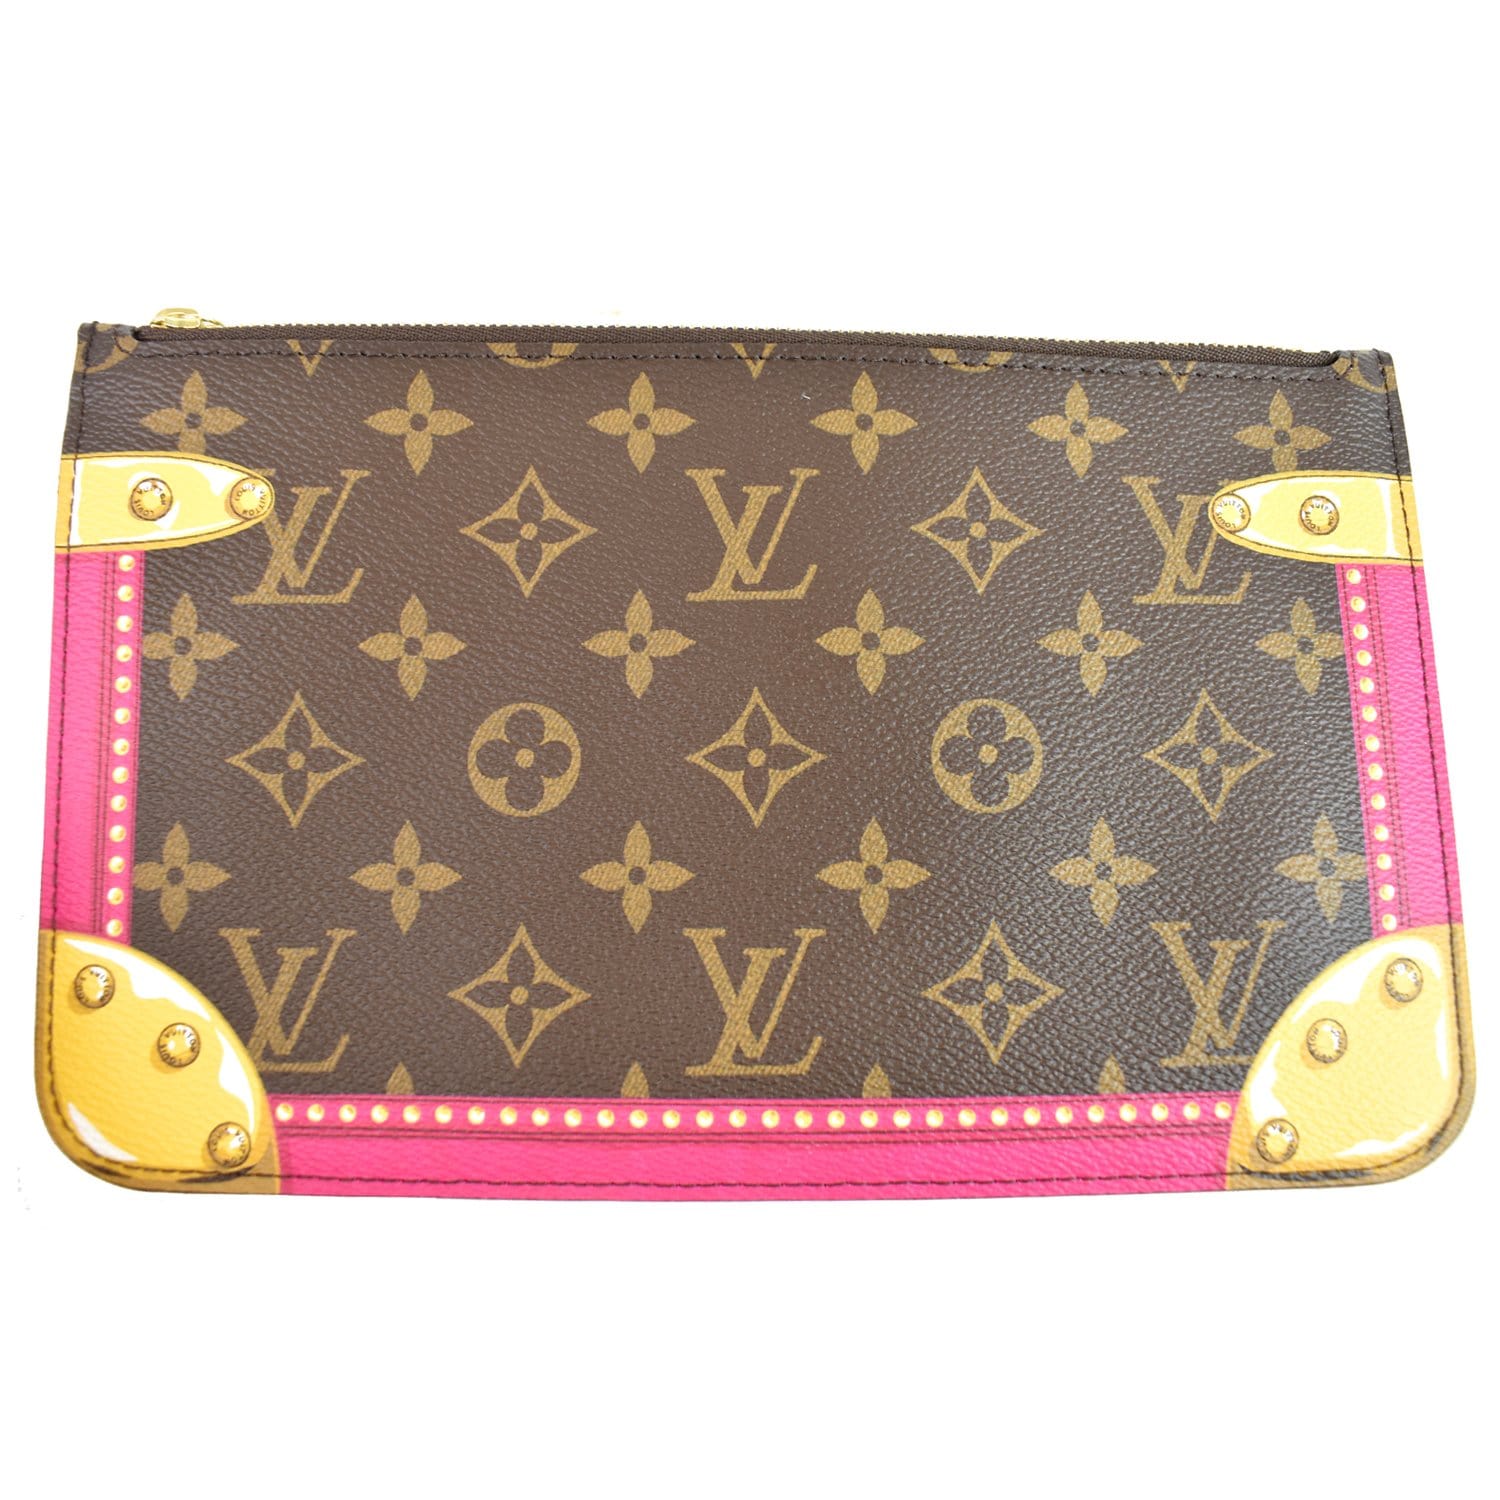 Pin by نيرڤانا on deepveer  Fashion, Louis vuitton bag neverfull